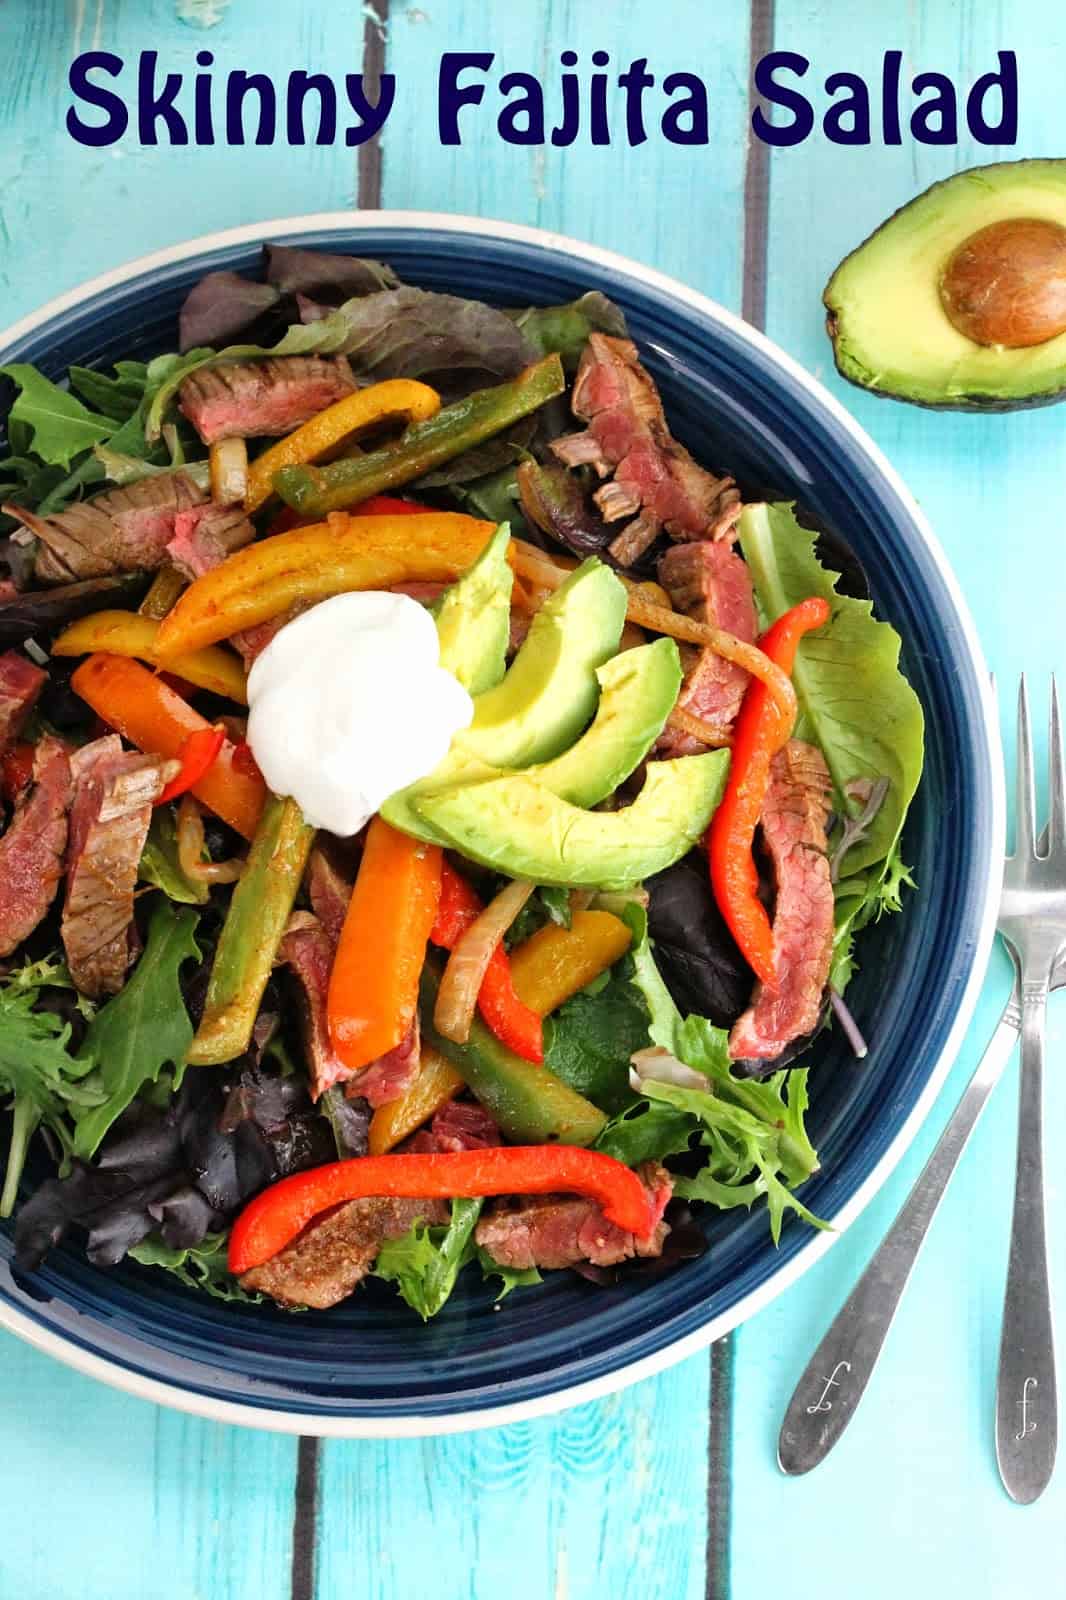 Skinny Fajita Salad served up with grilled flank steak, fresh avocado and bell peppers over a bed of lettuce and topped with a dollop of sour cream